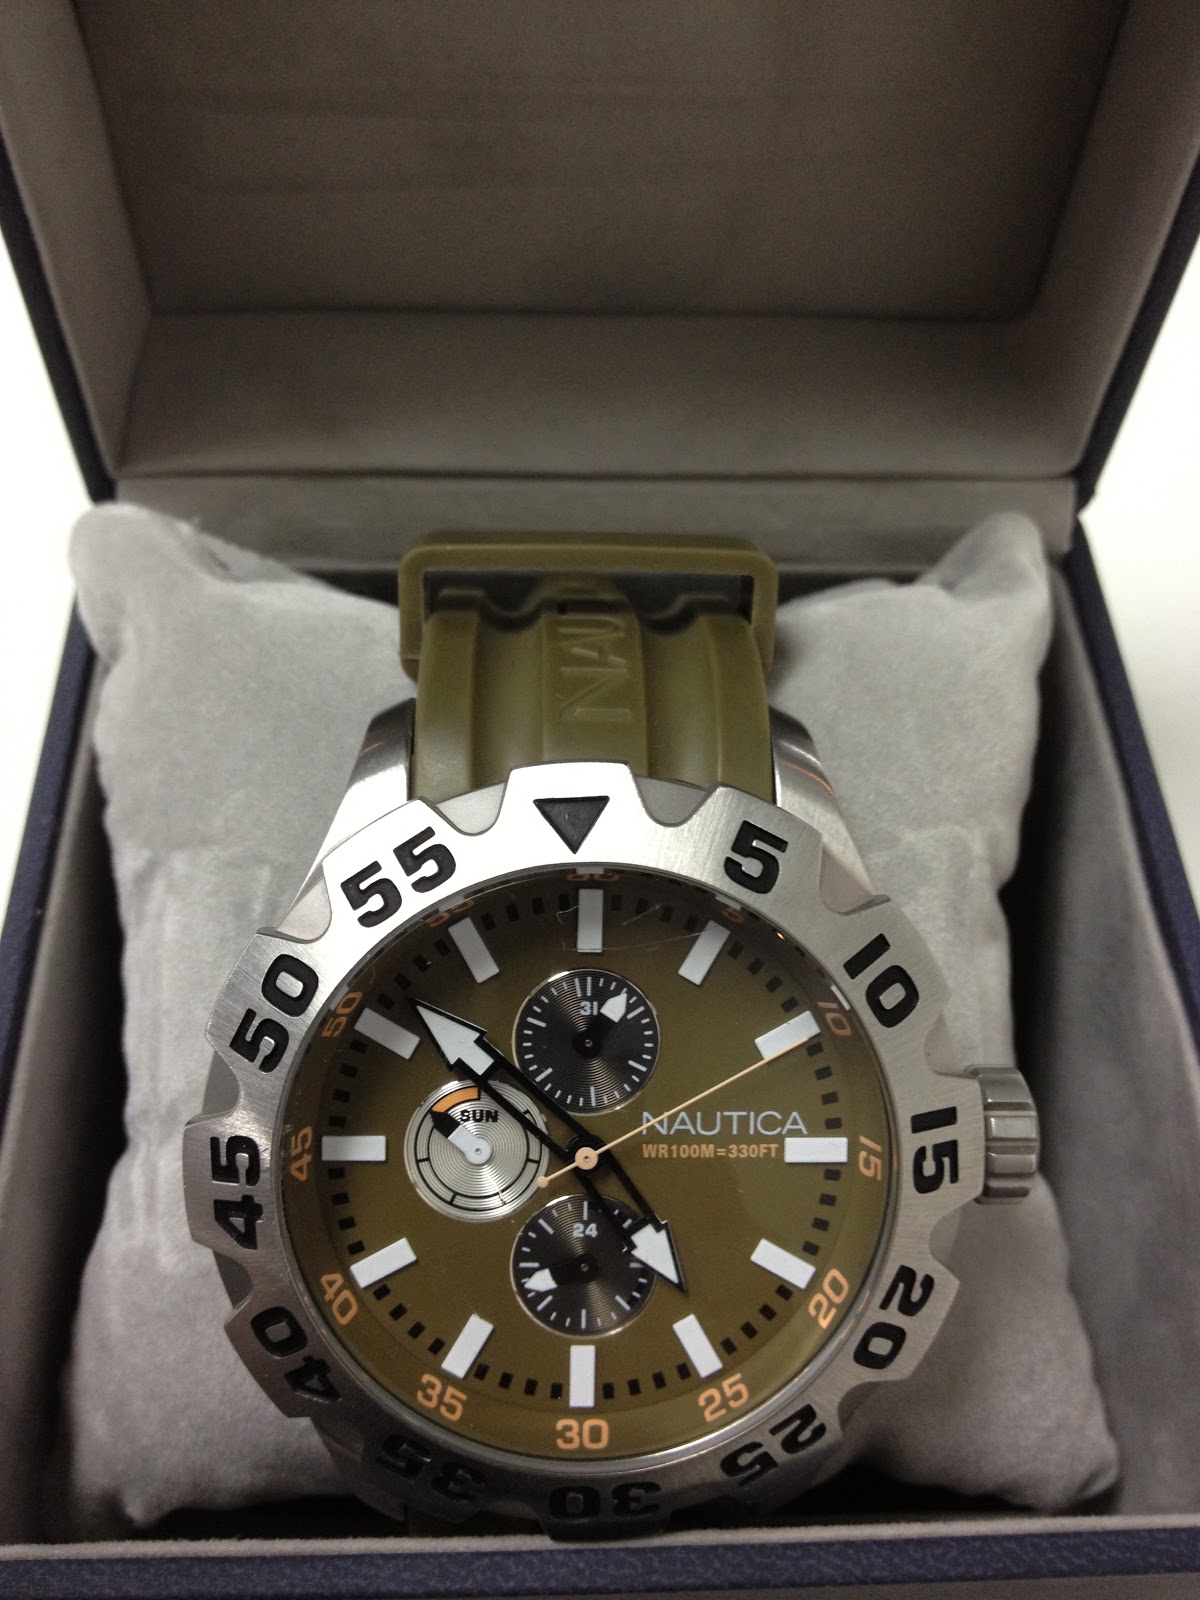 USEFUL THINGS: BRAND NEW NAUTICAL WATCH MEN'S TIME PIECE